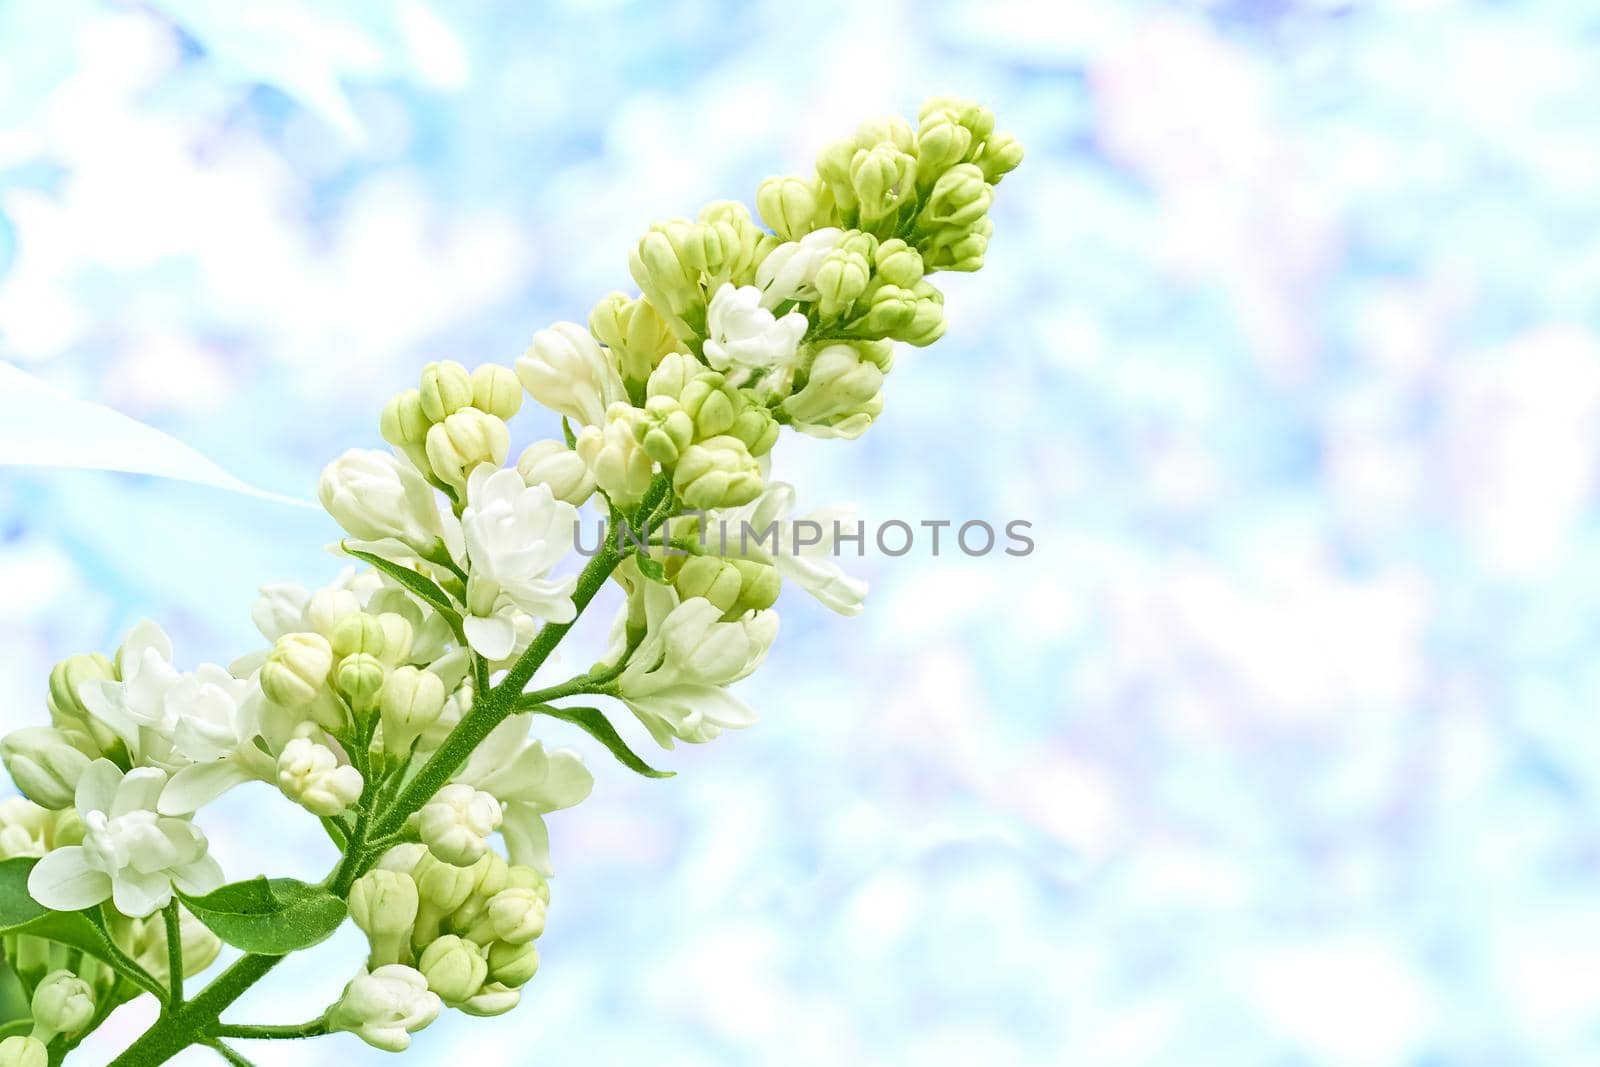 La Eurasian shrub or small tree of olive family, that has fragrant violet, pink, or white blossoms and is widely cultivated as an ornament.Fresh lilac branch with white flowers isolated on blue white